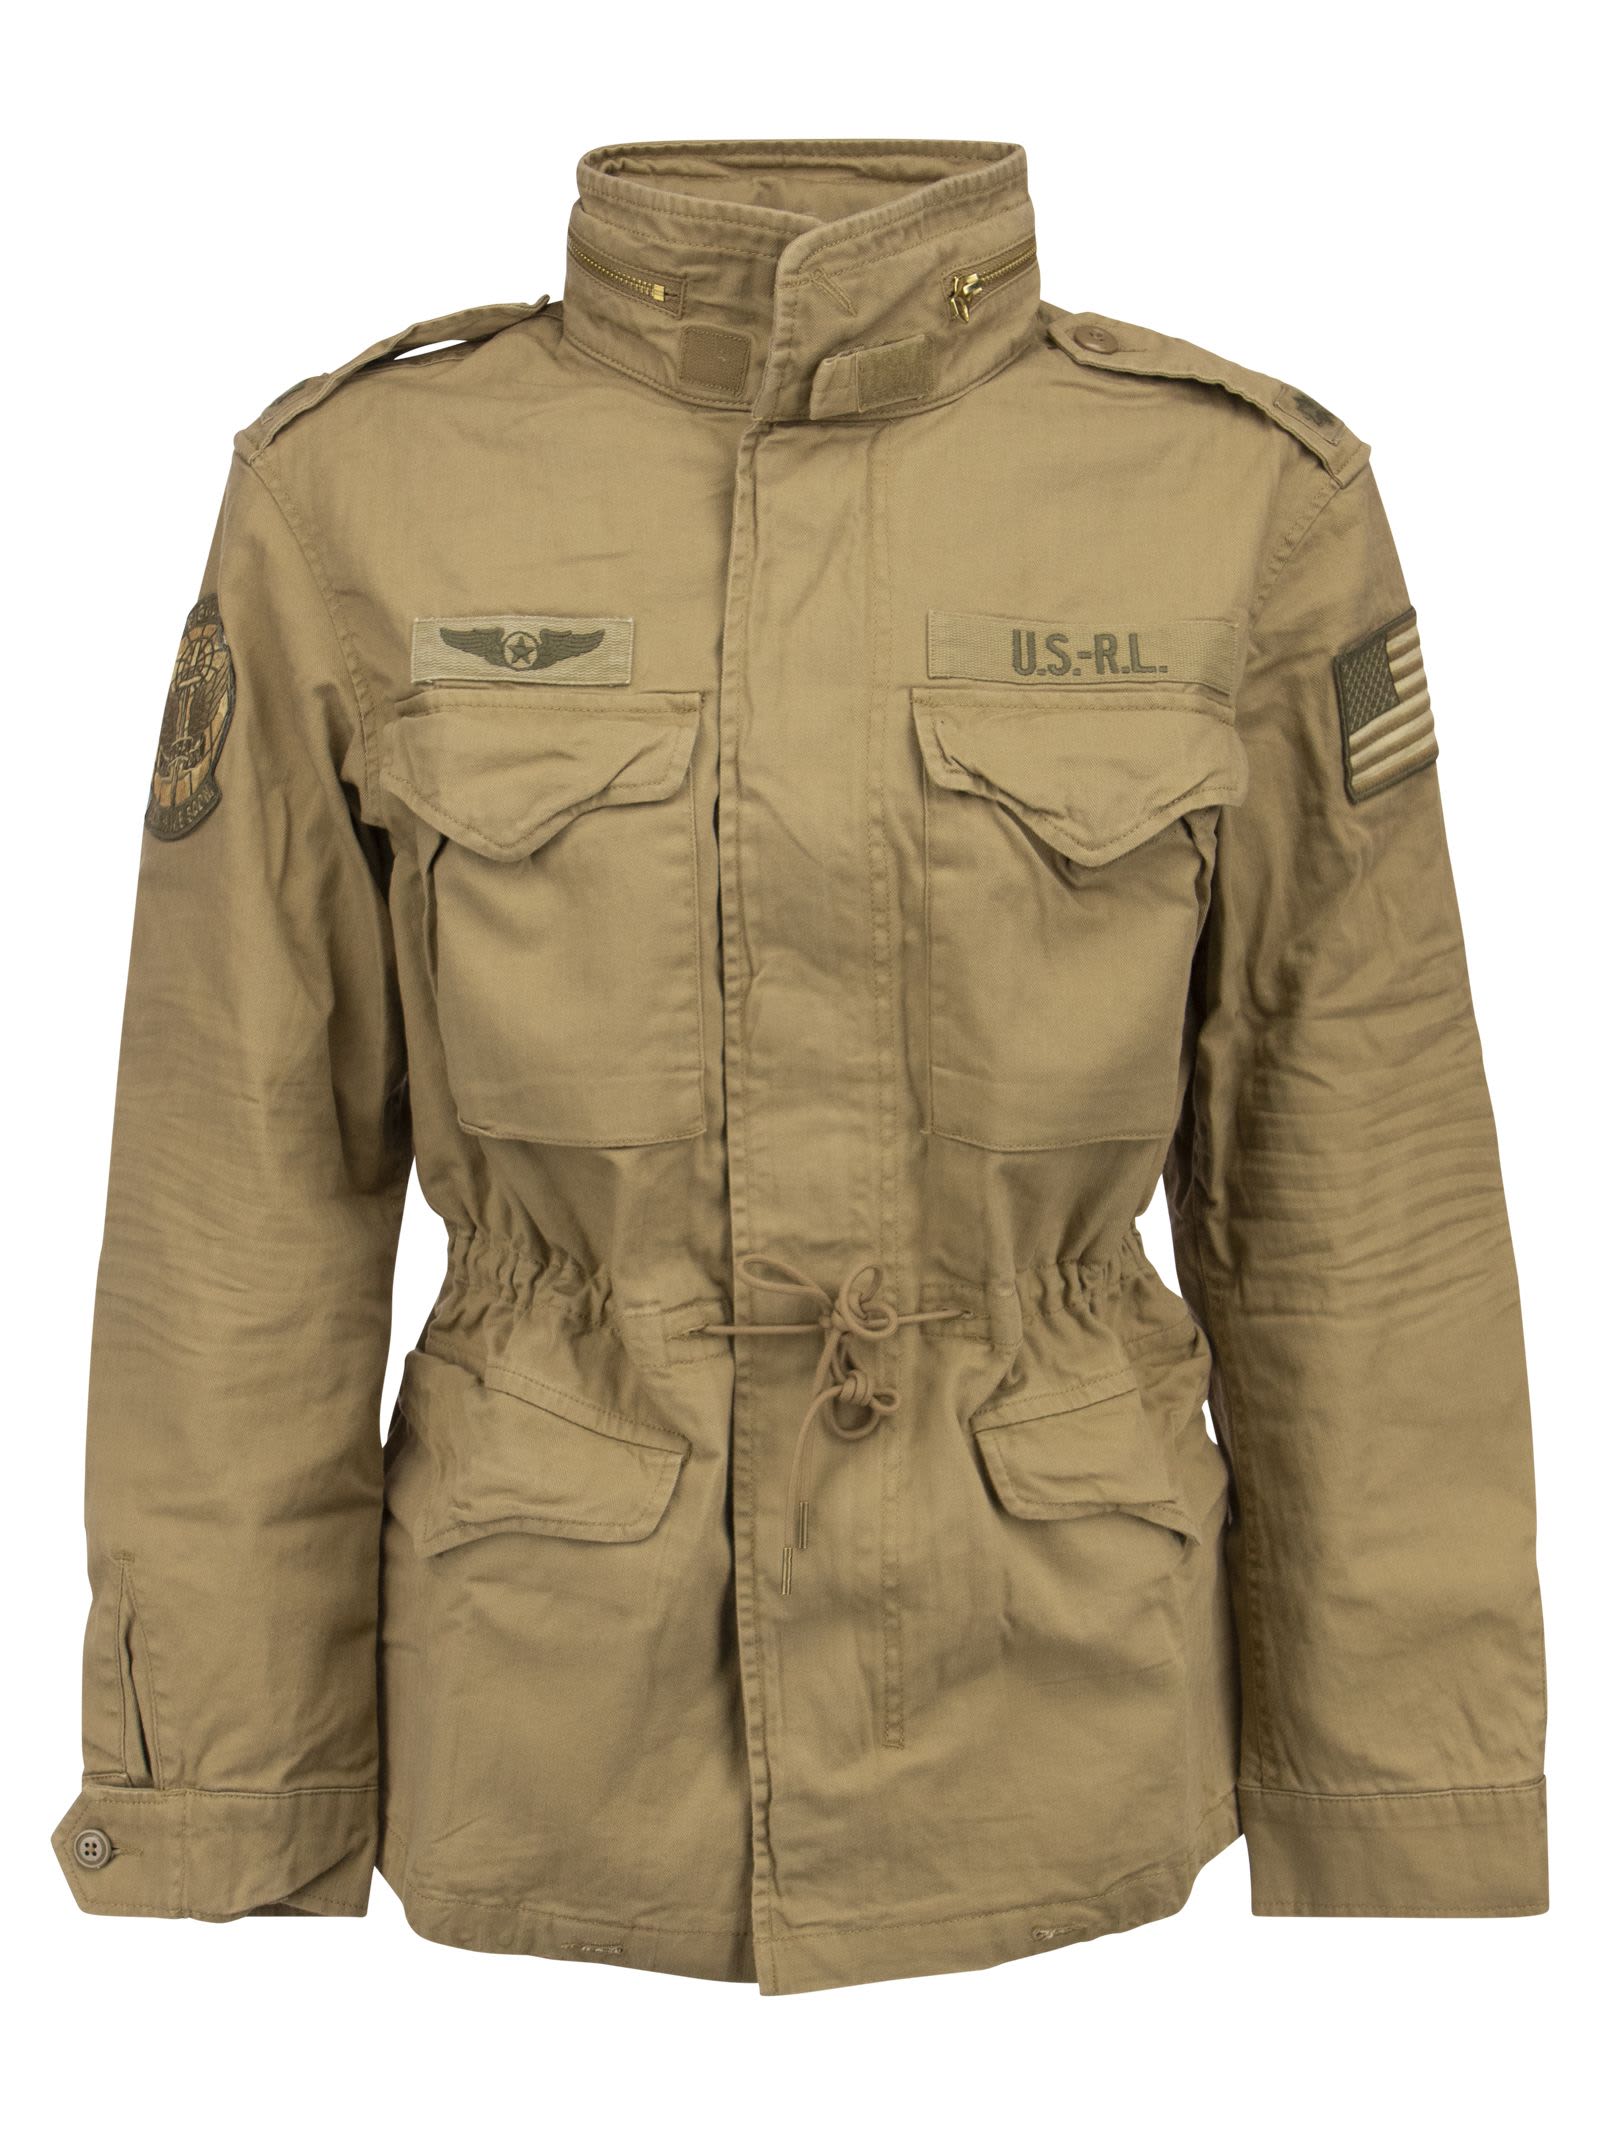 Ralph Lauren Military Jacket With Pockets